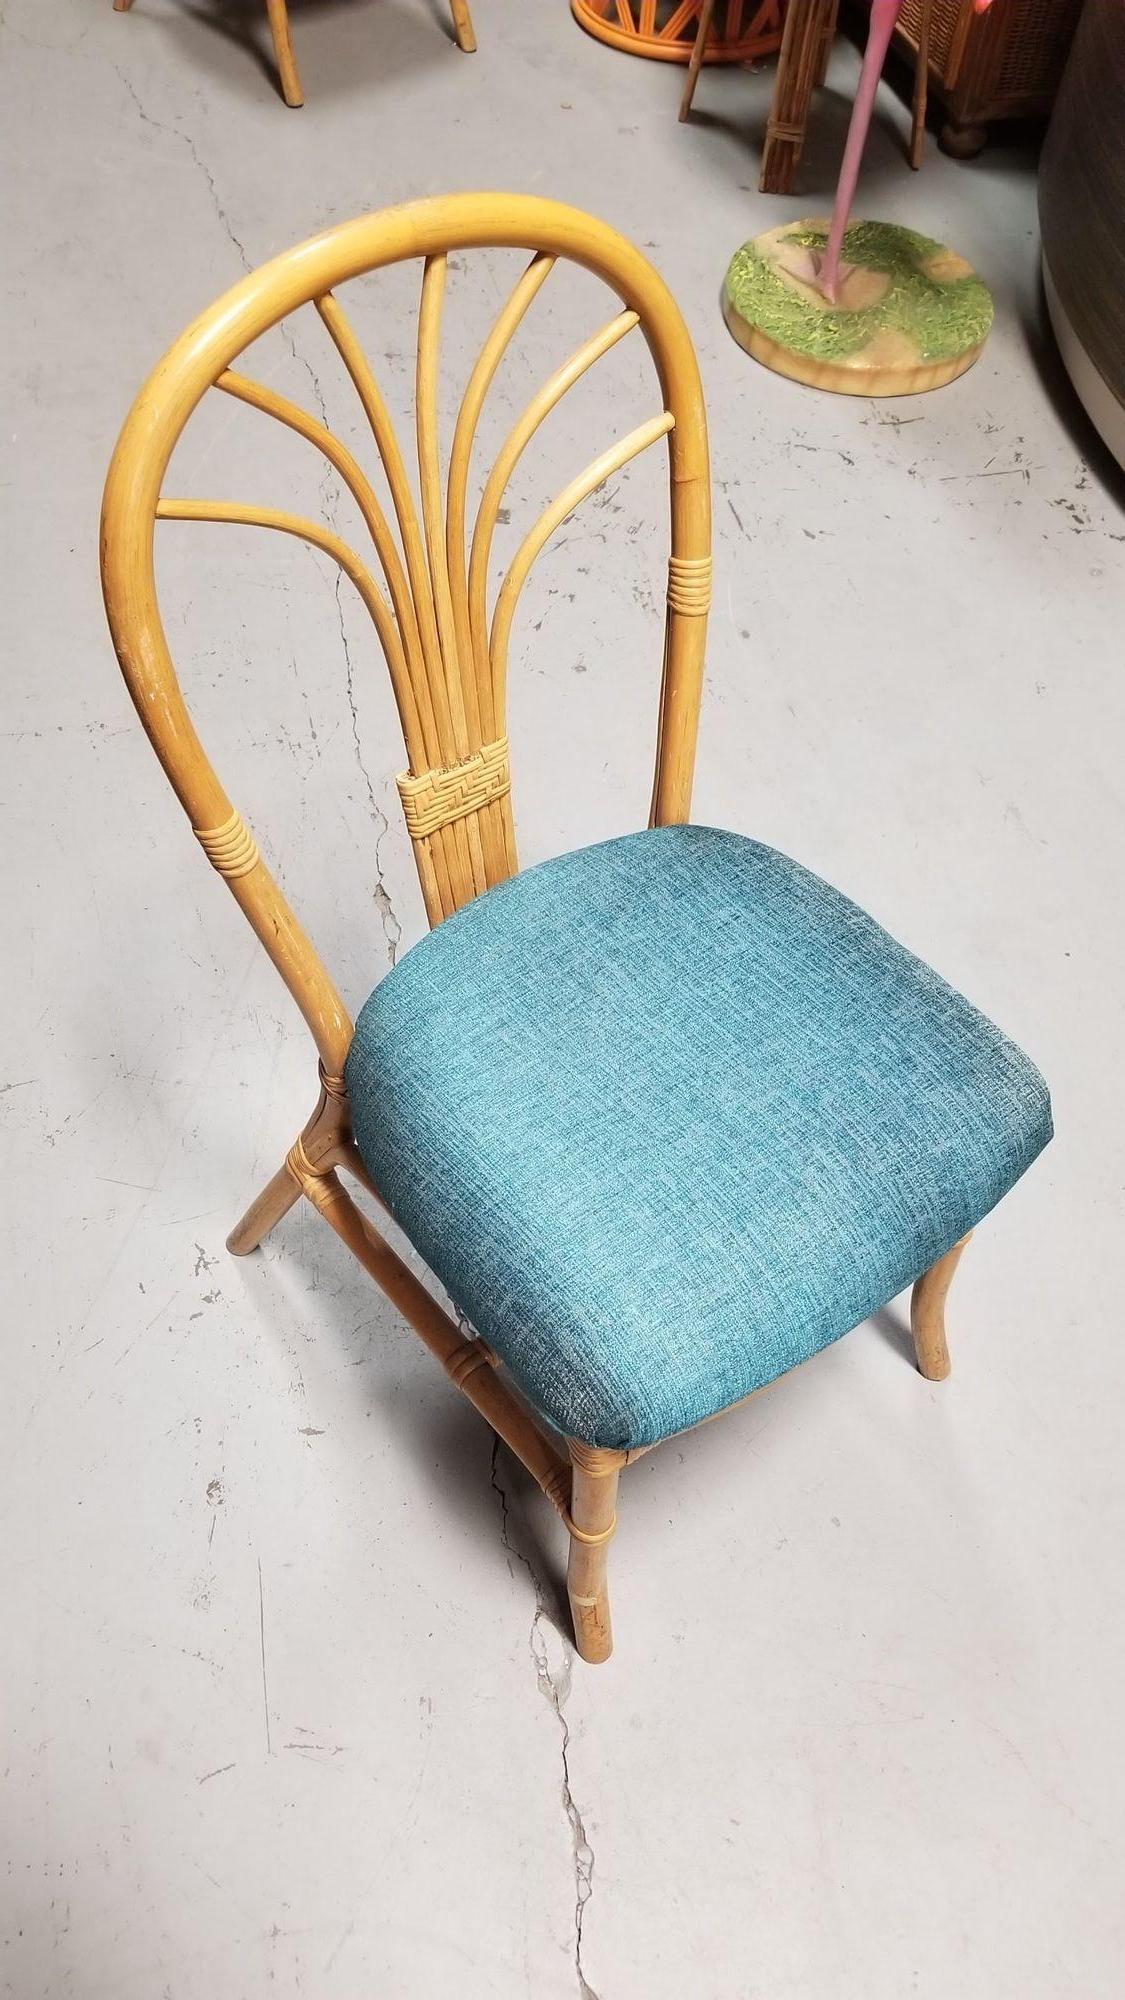 Late 20th Century Restored Rattan Fan Back Dining Chairs, Pair For Sale